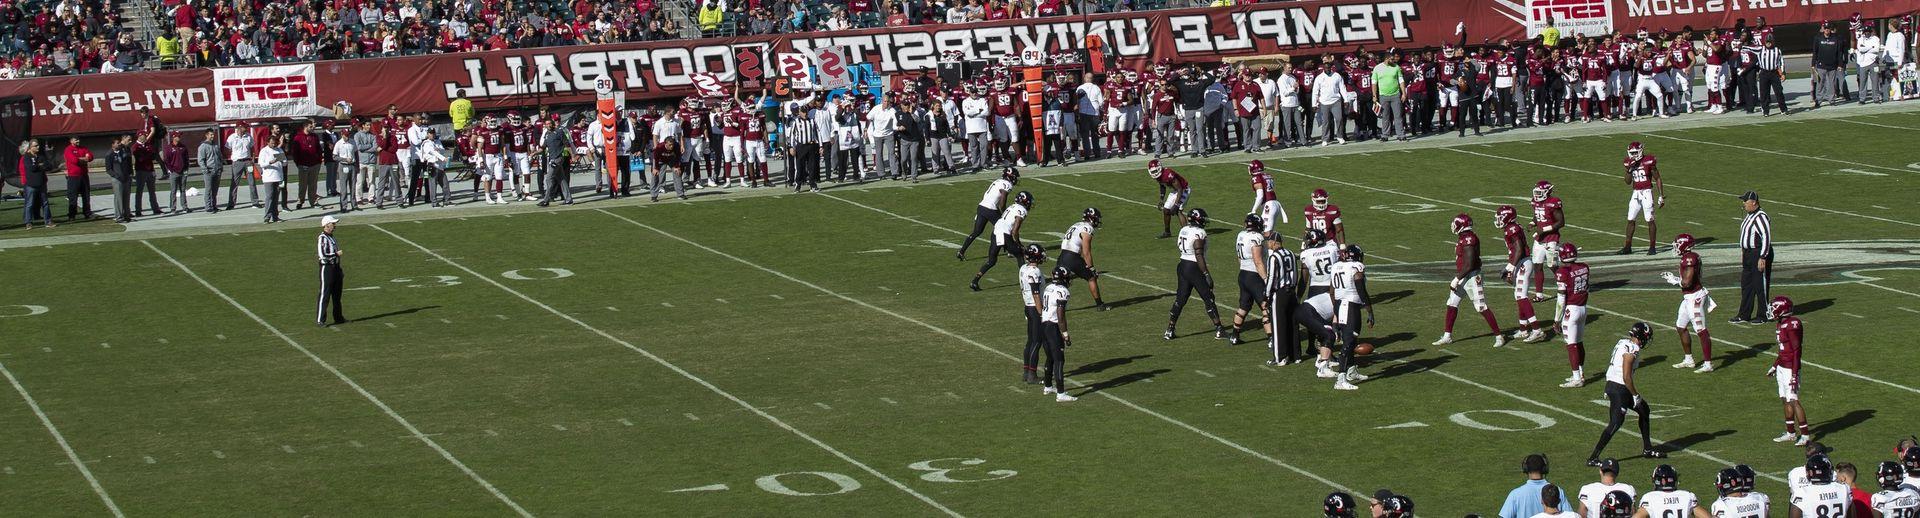 Temple University football players play a game while fans watch from the stands